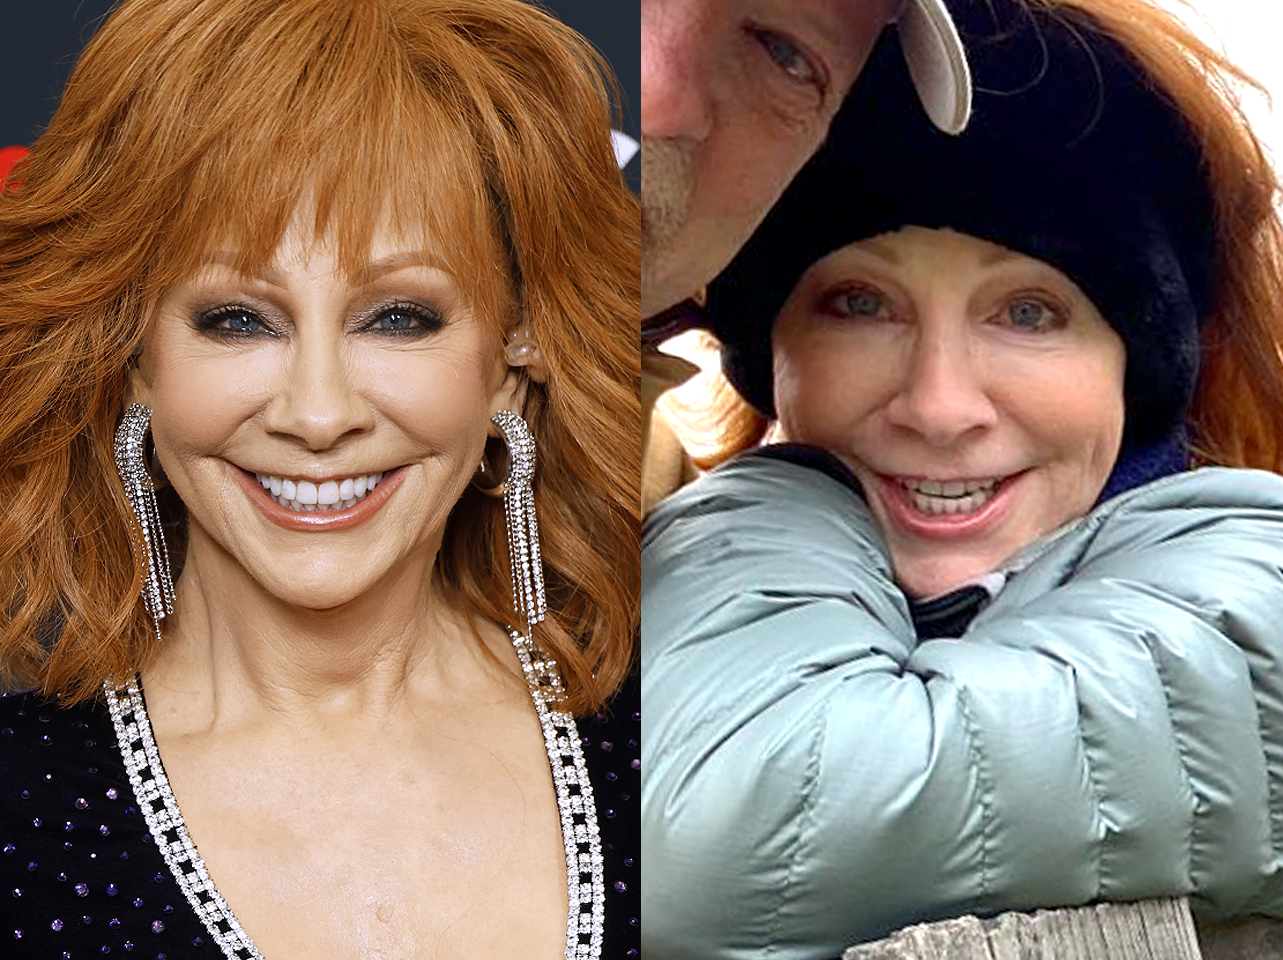 Reba McEntire with makeup vs without makeup | Source: Getty Images | Instagram/reba